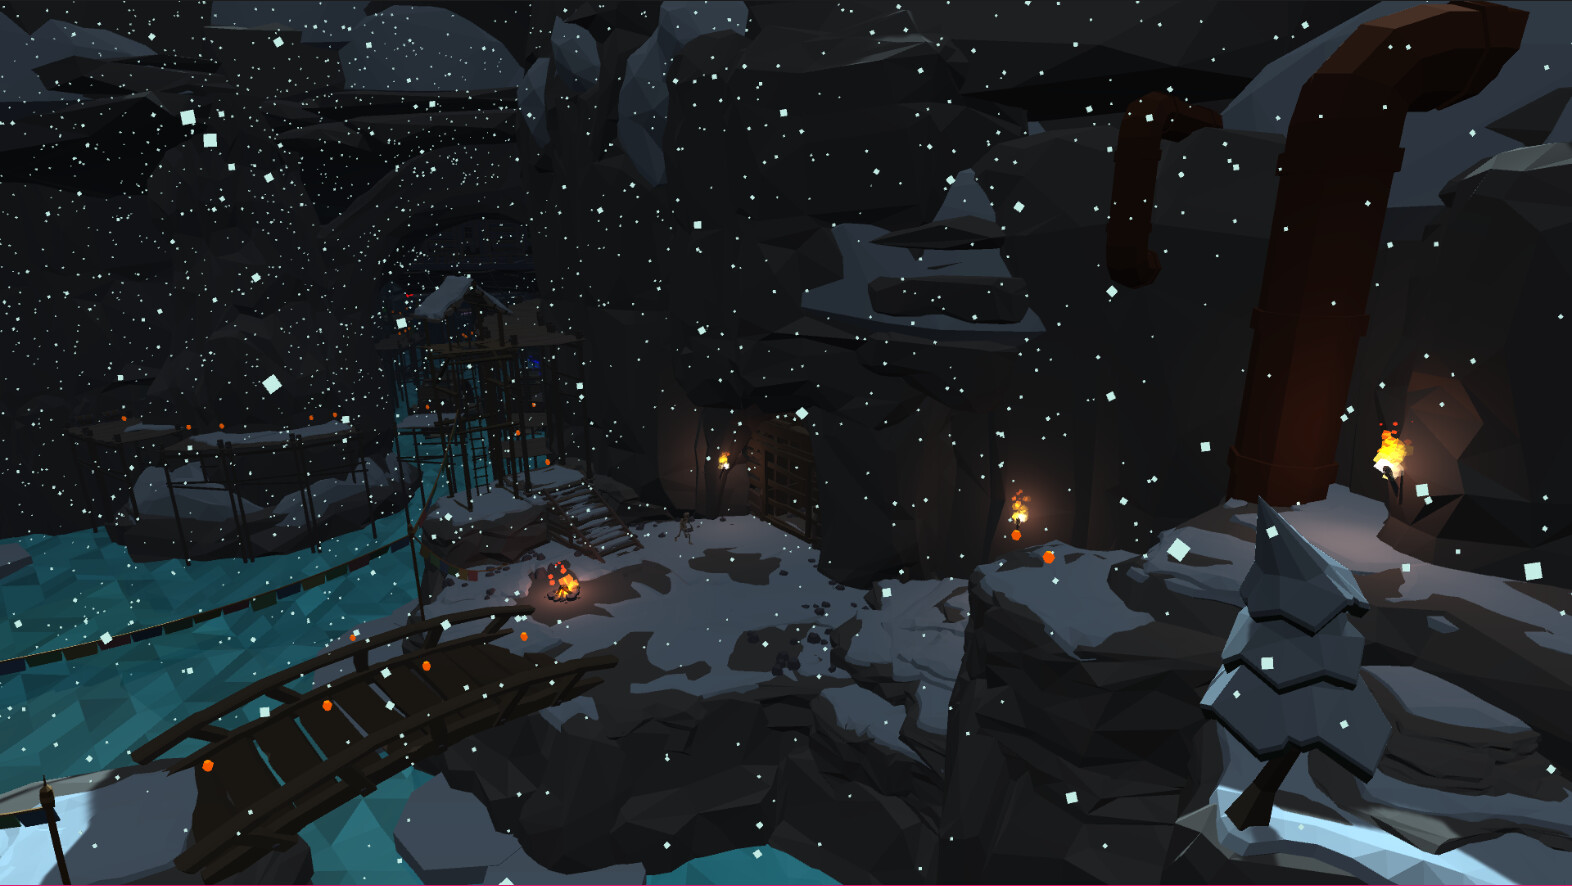 A screen of the entrance to the caverns blocked by a gate the player must raise to explore further.